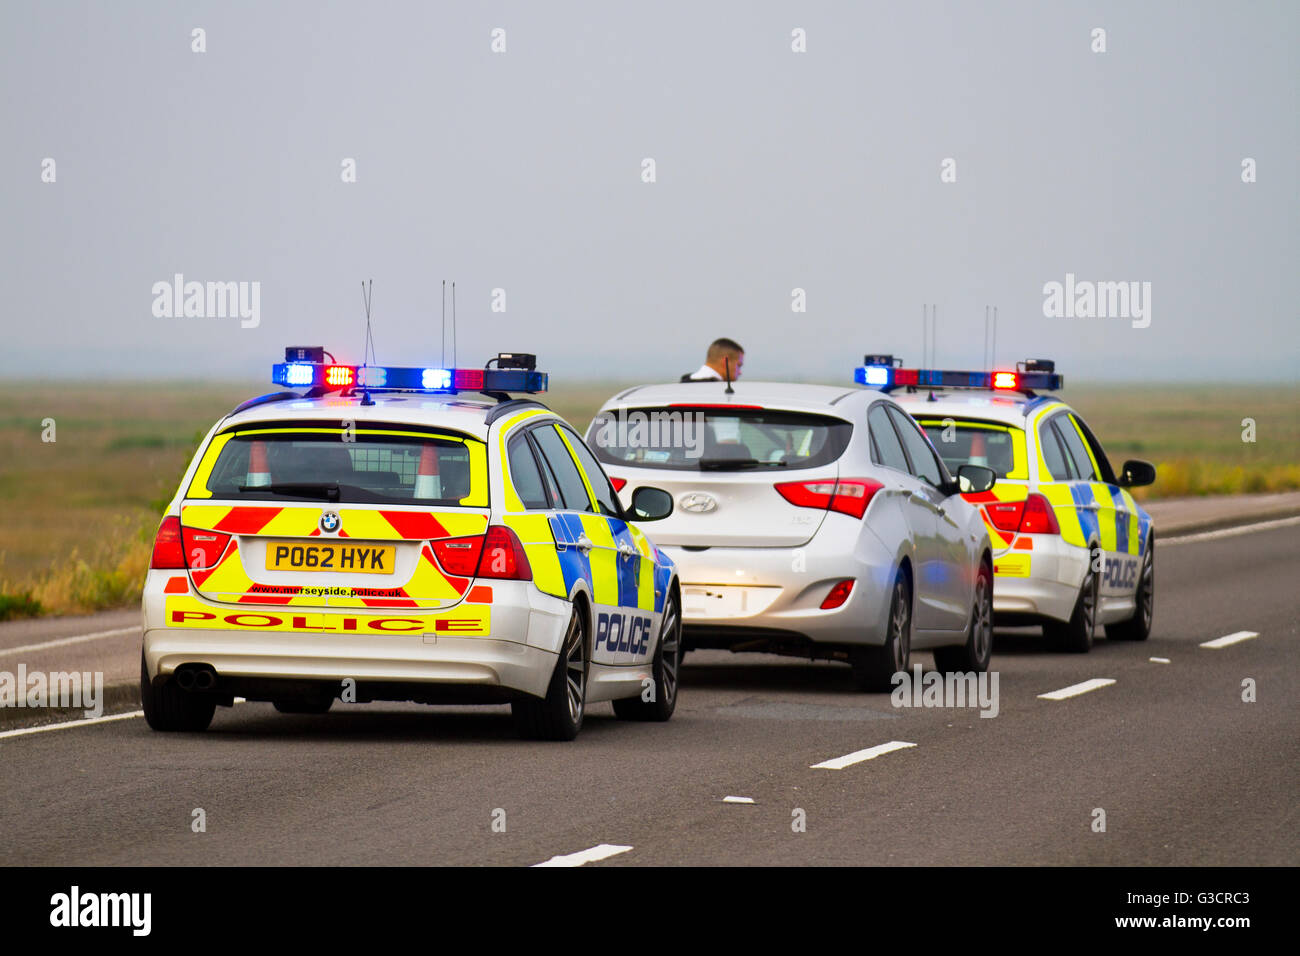 British Traffic policemen on Emergency 999 Response. British Police patrol cars attending vehicle traffic stop on Marine Drive, Southport promenade, Merseyside UK.  Two police vehicles were used in a pursuit tactic, as well as using red and blue lights to pull over the motorist speeding. Stock Photo